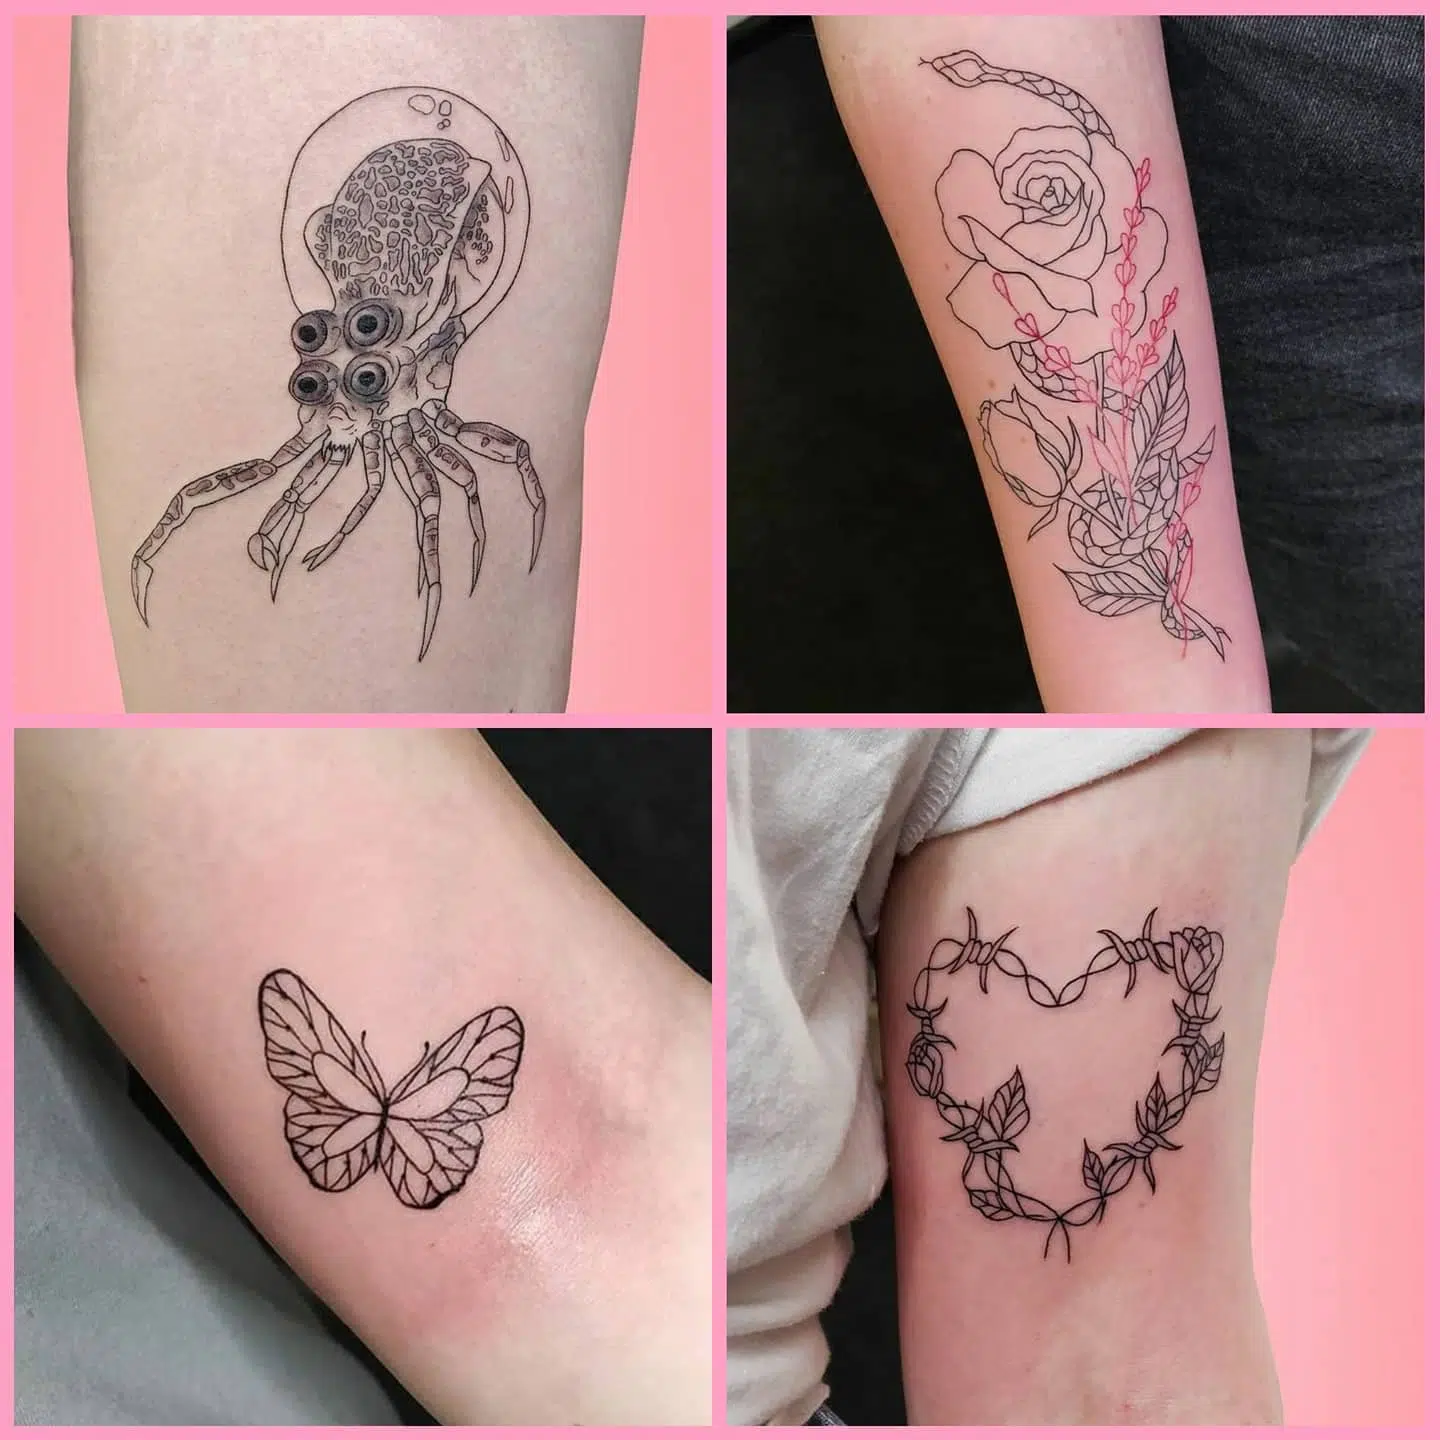 A few gorgeous tattoos by Jess Wii during her very busy guest spot with us... she dished out 24 in total during her week with us! It was so lovely having you here, don't think we've ever met a more polite and caring artist! Thanks so much for coming and looking forward to having you back next year! 
jess.wii.tattoos             